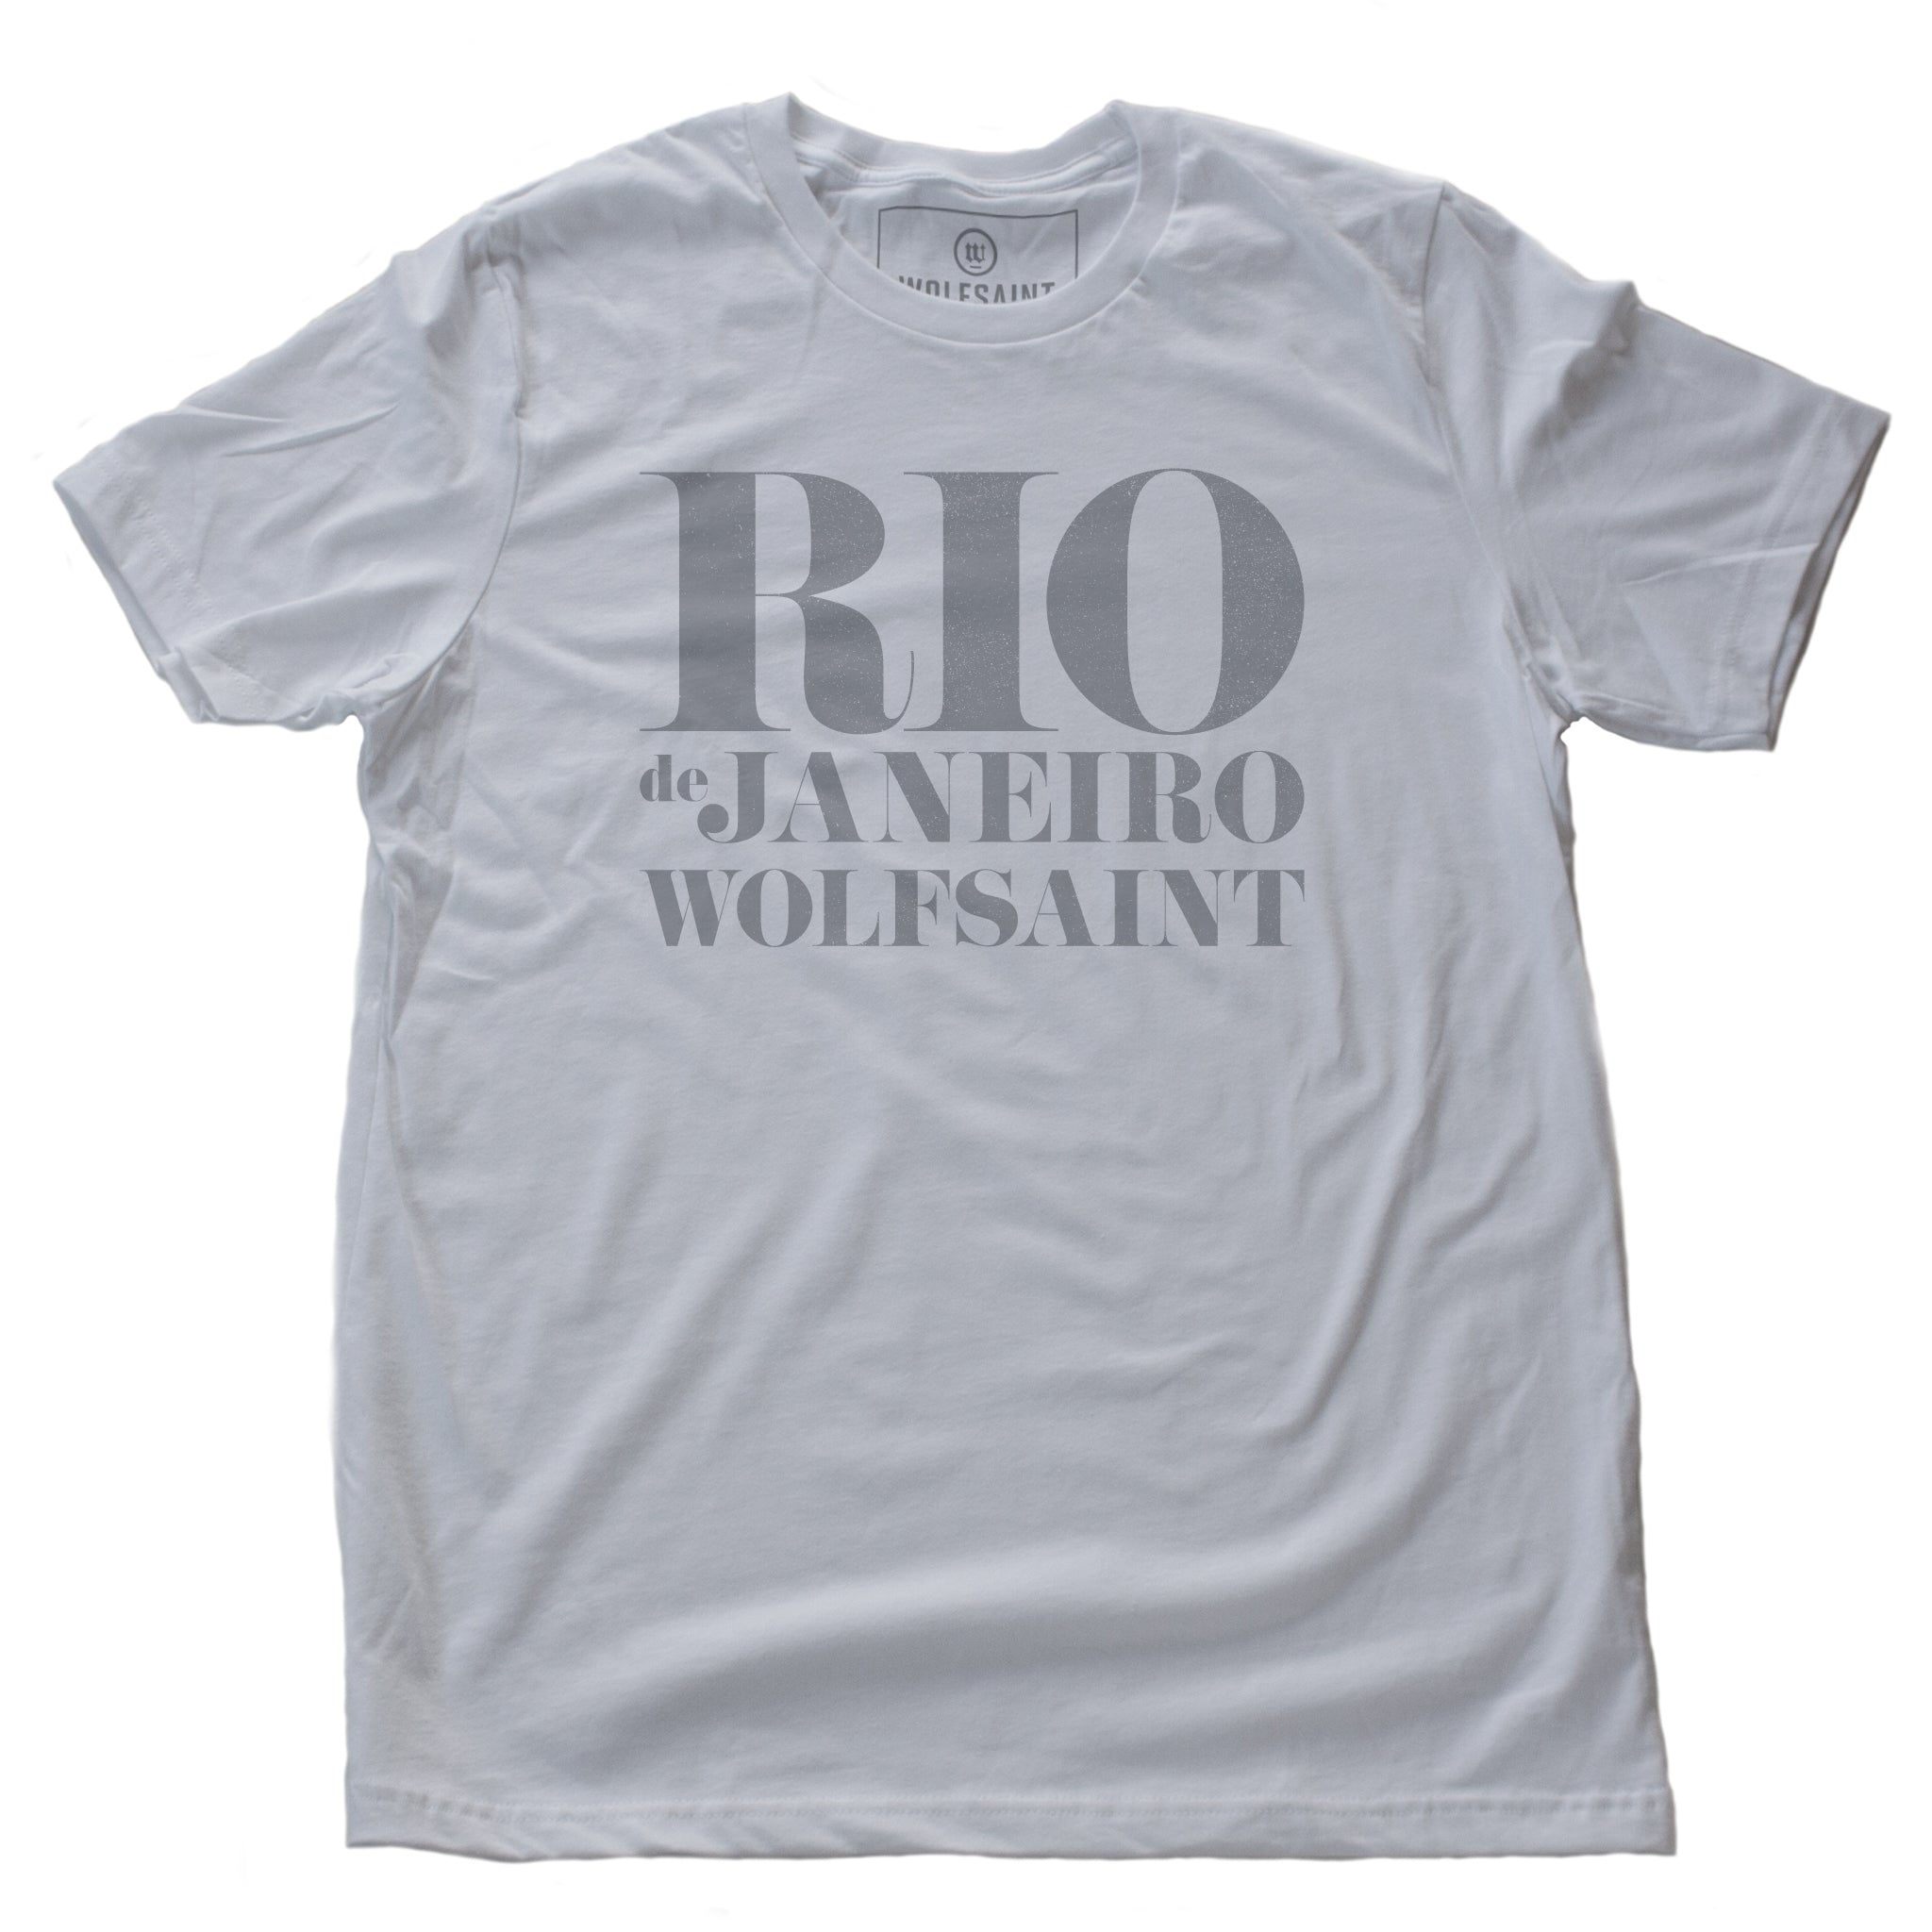 A retro graphic t-shirt in classic White, with “RIO” large, above “de Janeiro” and “Wolfsaint” in a bold, fashion-forward font. From Wolfsaint.net